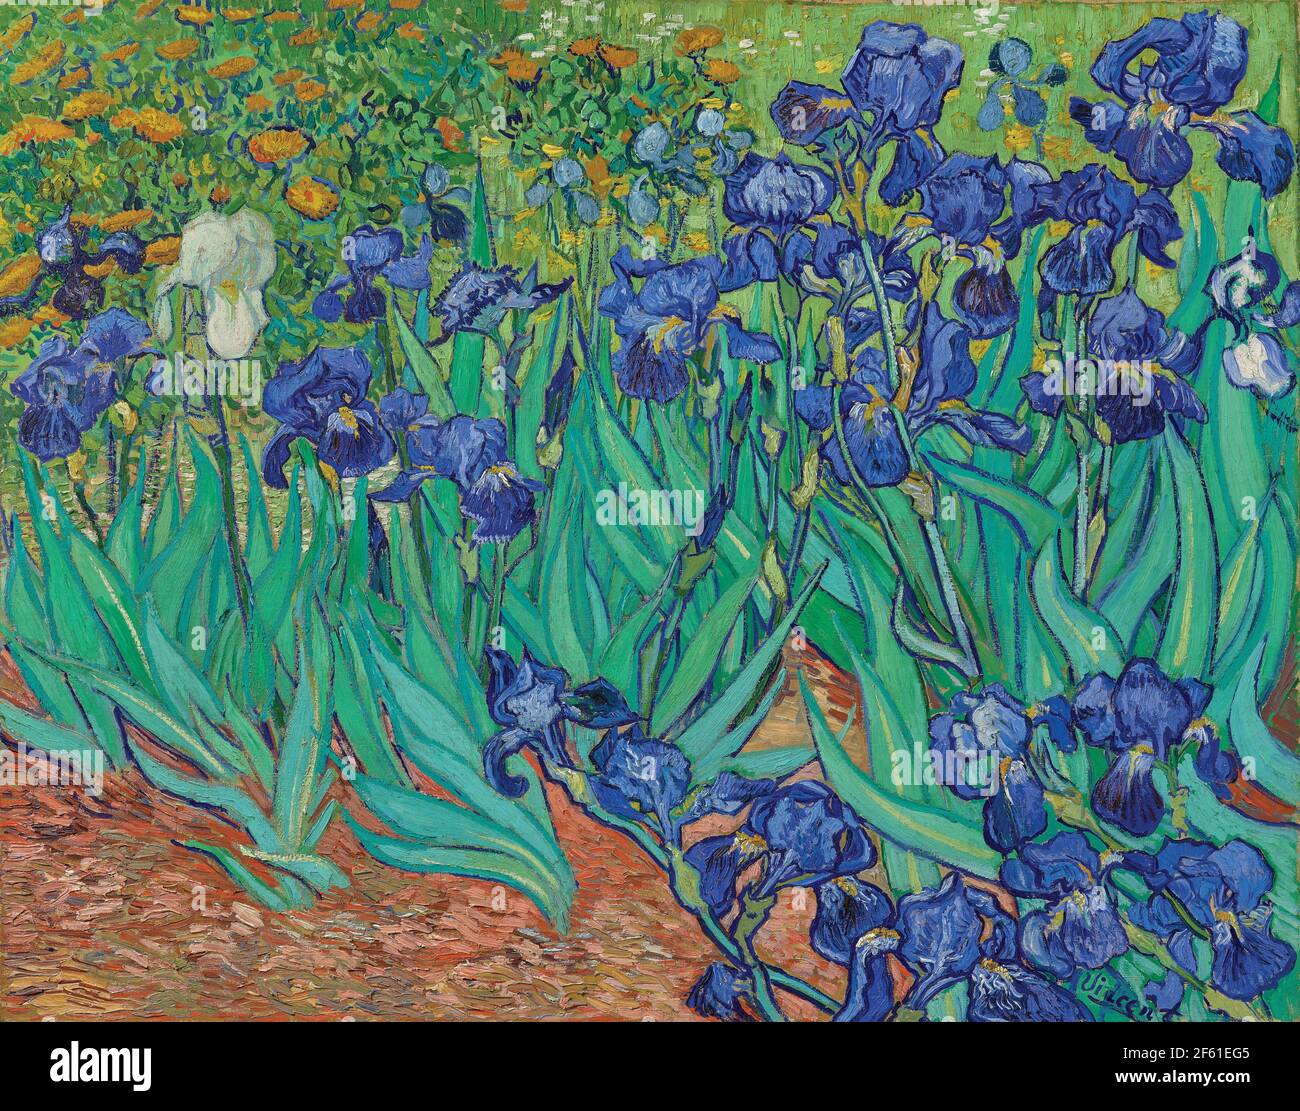 Irises by Vincent van Gogh.  Vincent van Gogh, 1853 - 1890, Dutch Post-Impressionist artist.  Irises was painted in 1889 while van Gogh was in the asylum at Saint-Rémy-de-Provence.  The work is in the collection of the J.Paul Getty Museum in Los Angeles. Stock Photo